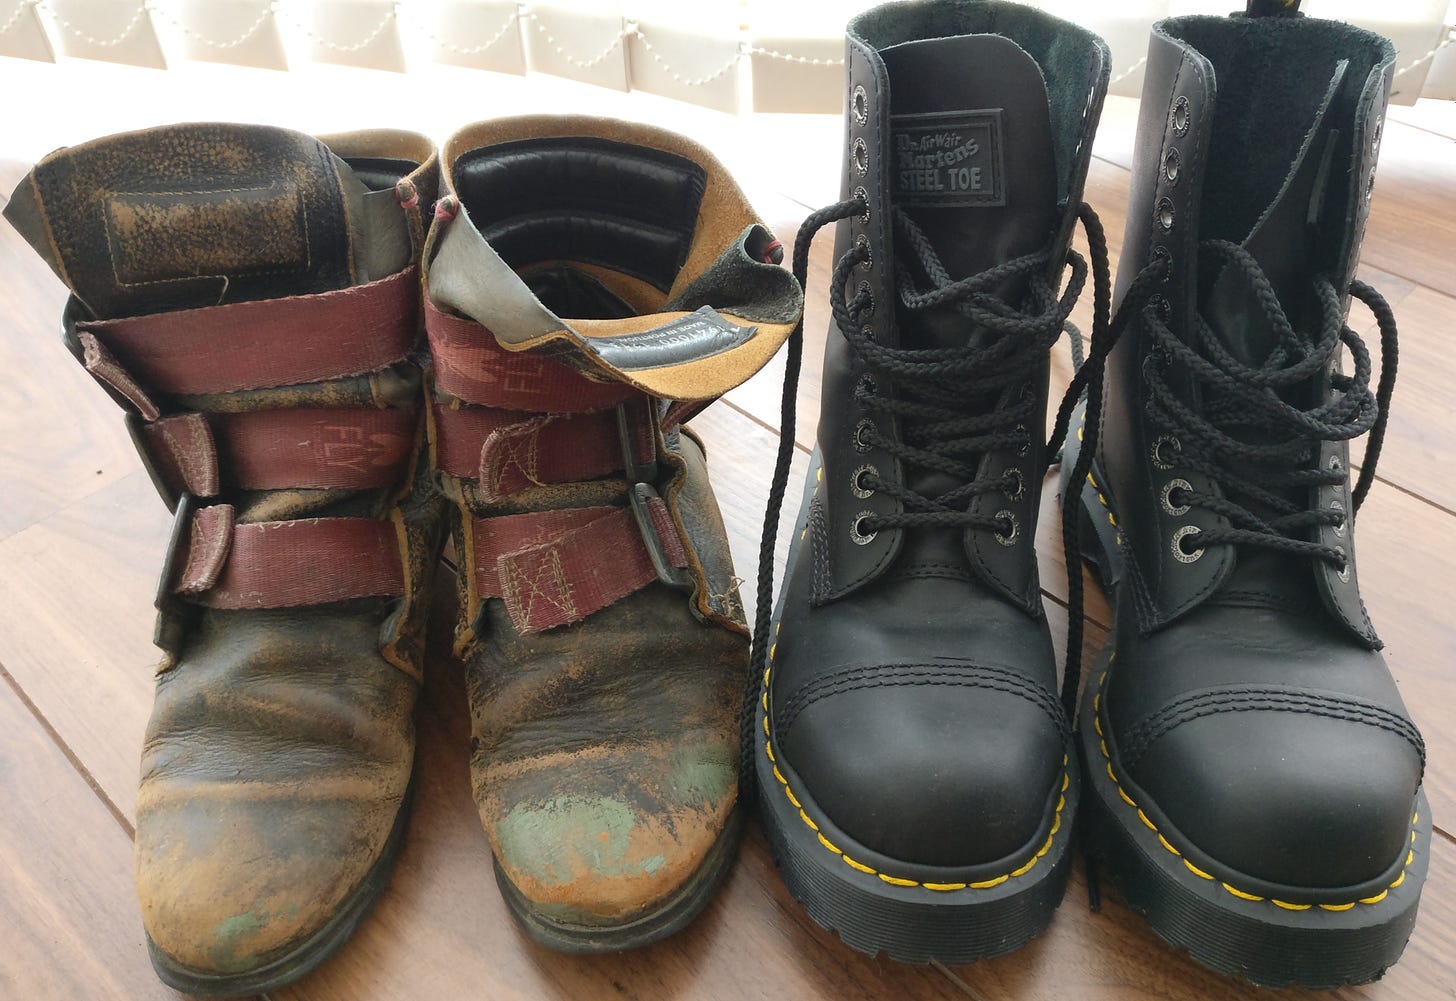 image description: a photo of two pairs of boots on a slatted wood-effect floor, with white vertical blinds hanging on the window behind them. on the left are a much-loved, totally knackered old pair of brown leather fly london pirate-style boots with three seatbelt-canvas straps. on the right are a brand new pair of black leather, steel toecapped DocMartin boots (a generous gift from a kind friend a few years ago, after seeing the state of the other ones, with their soles hanging off).